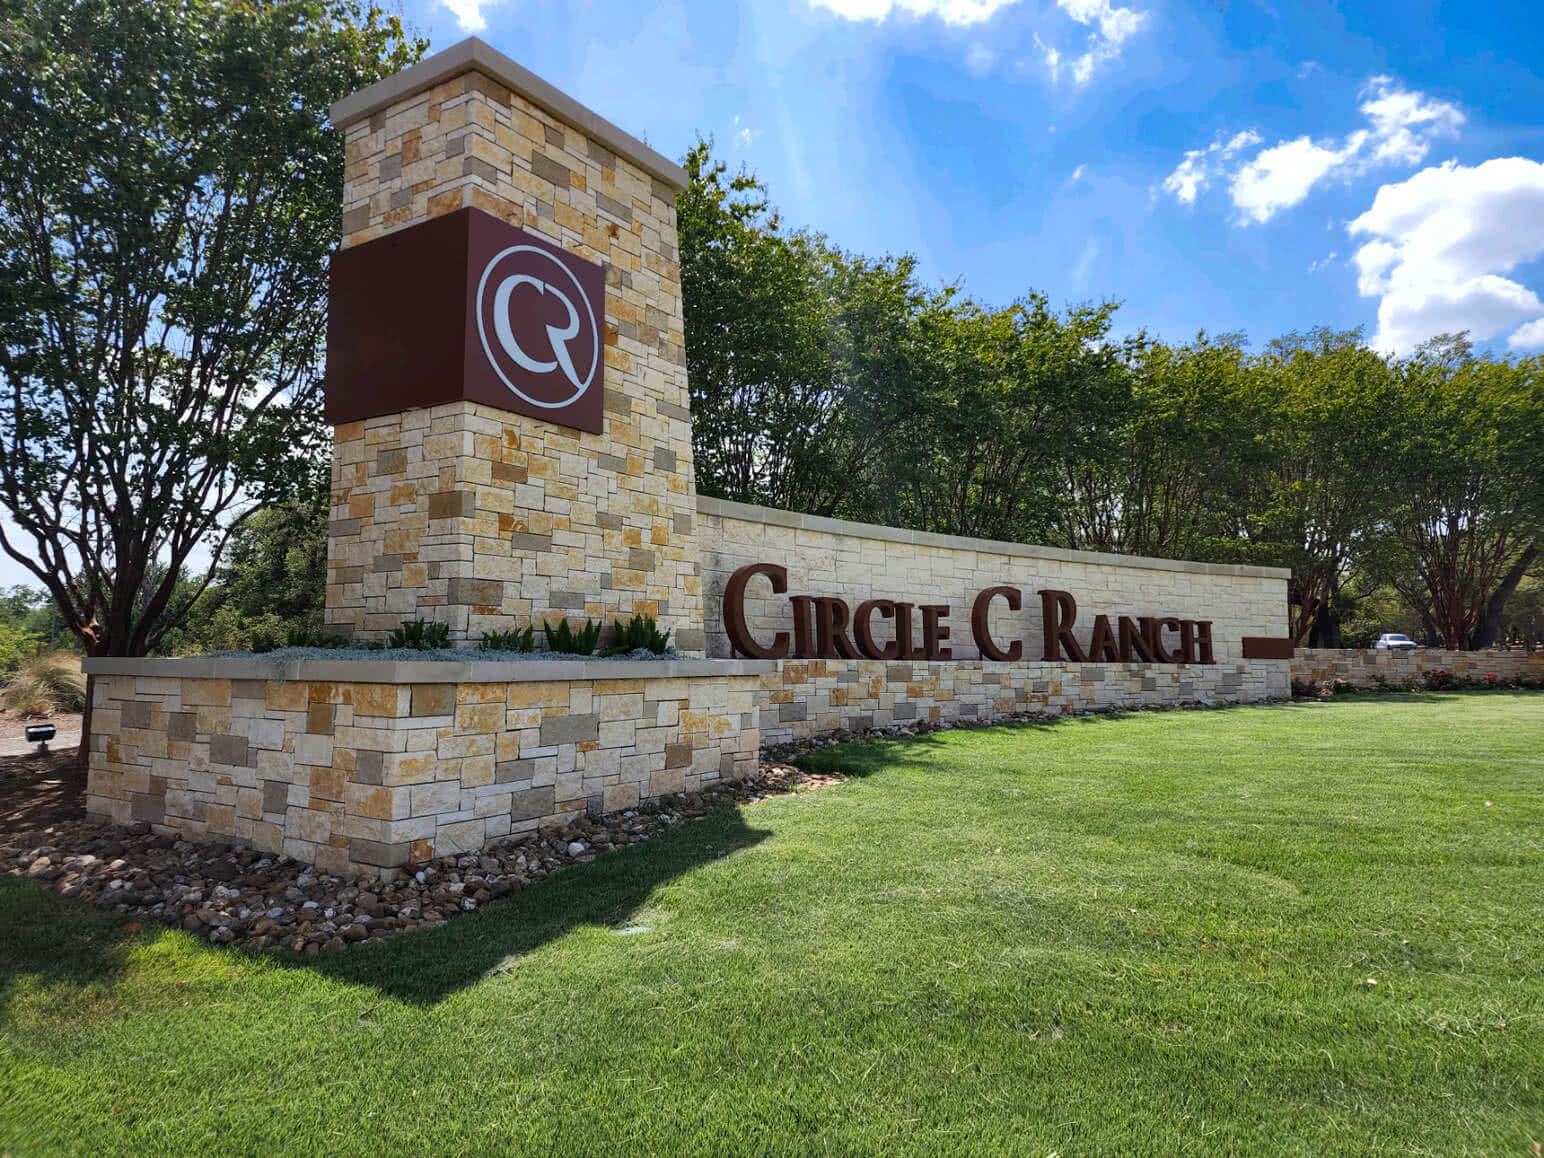 Circle C Ranch Roofing Contractor